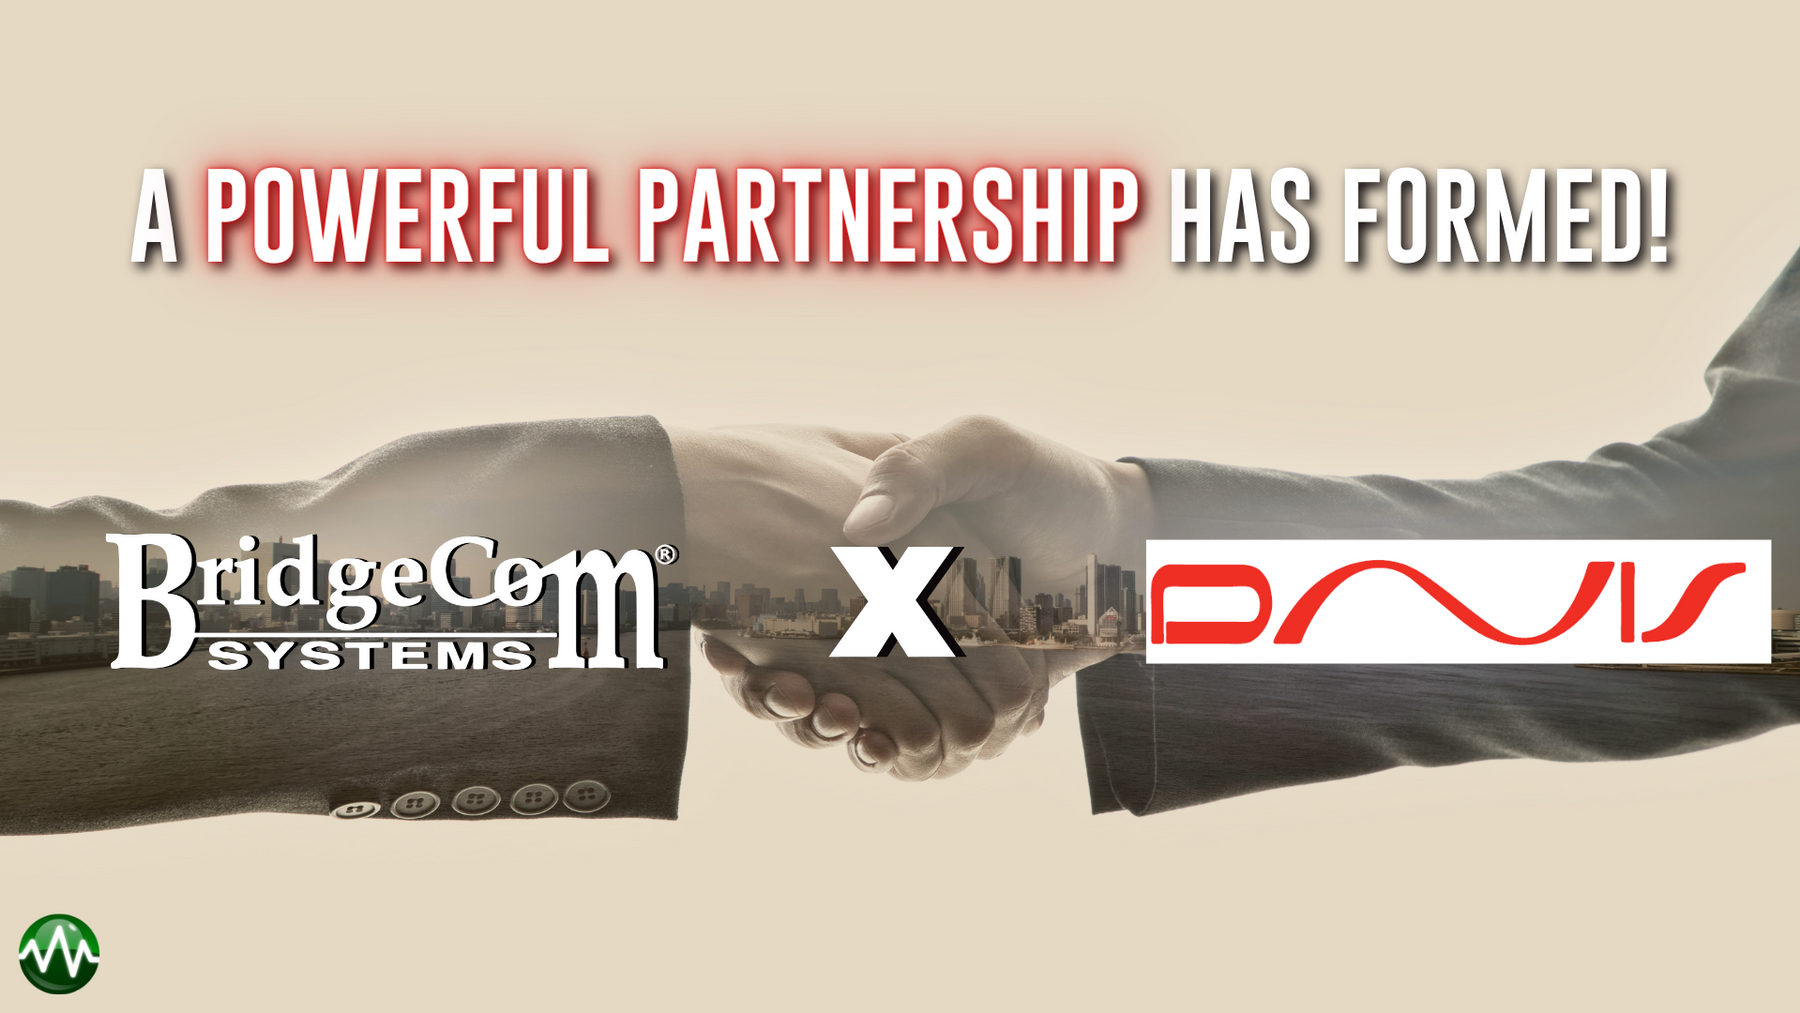 Breaking: BridgeCom Systems and Davis Electronics Co., Inc. Partner to Bring High-Performance Two-Way Radios to Businesses in the Louisville, KY Area